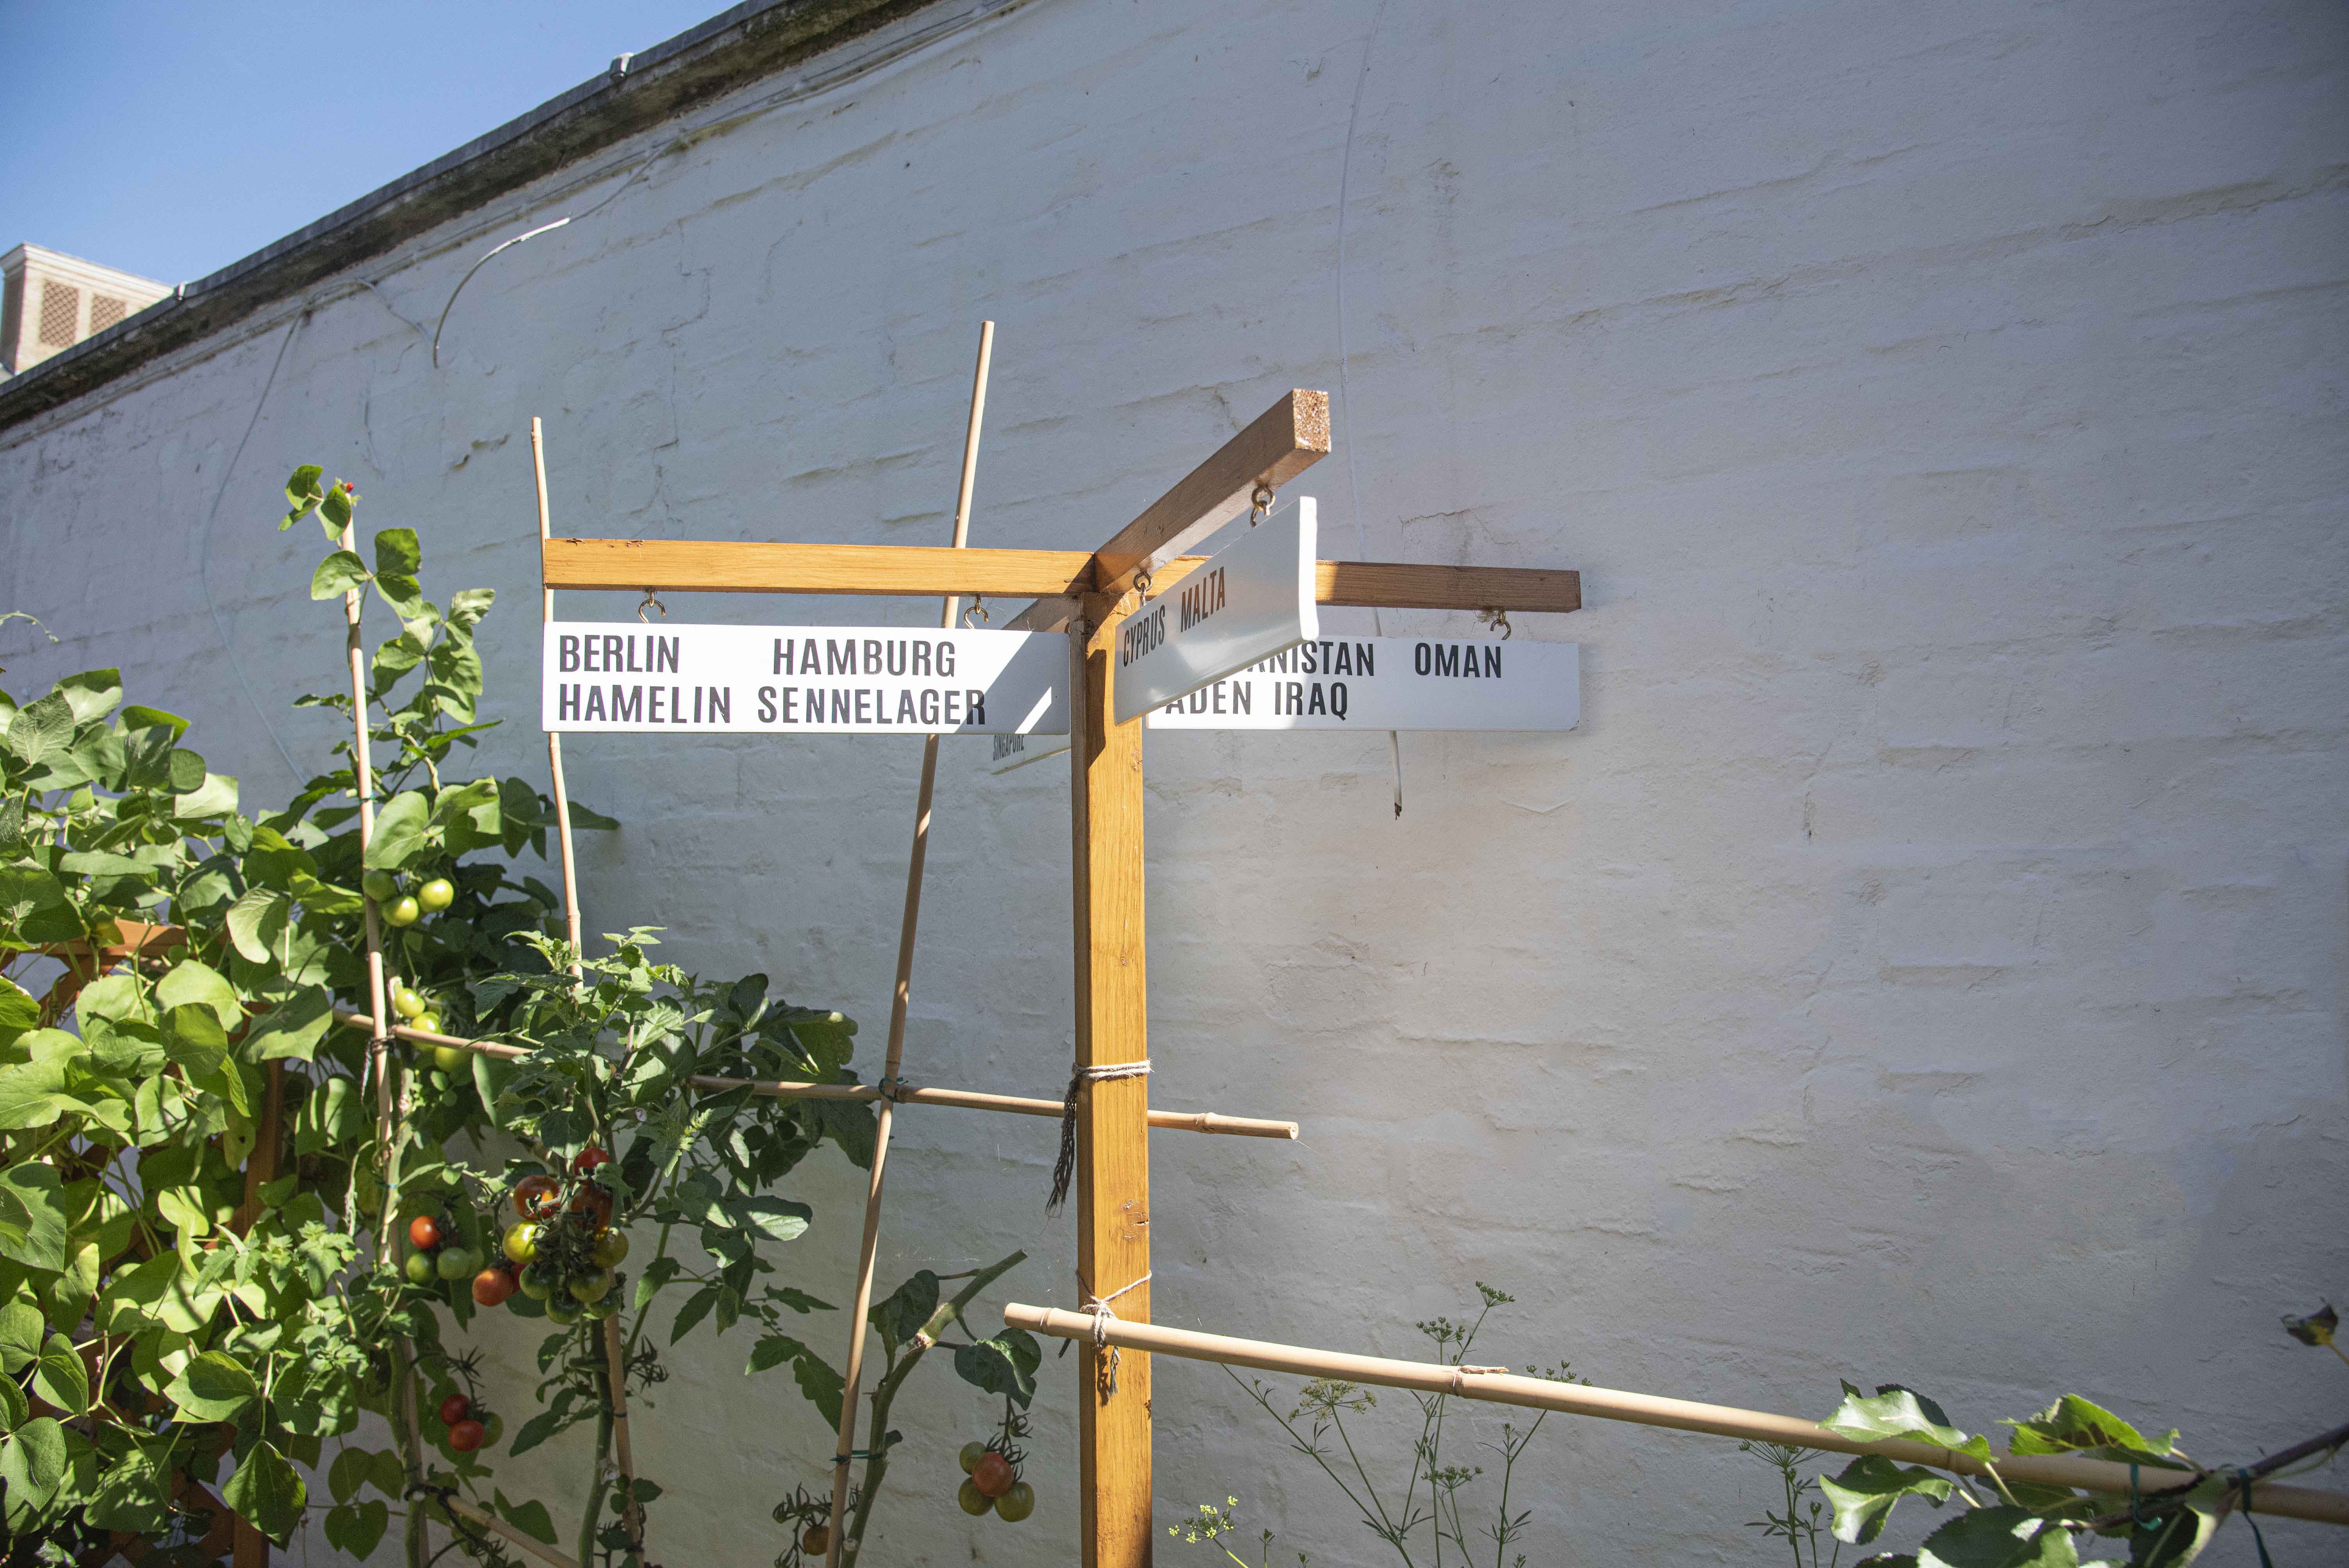 A sign listing different destinations in Archie's garden